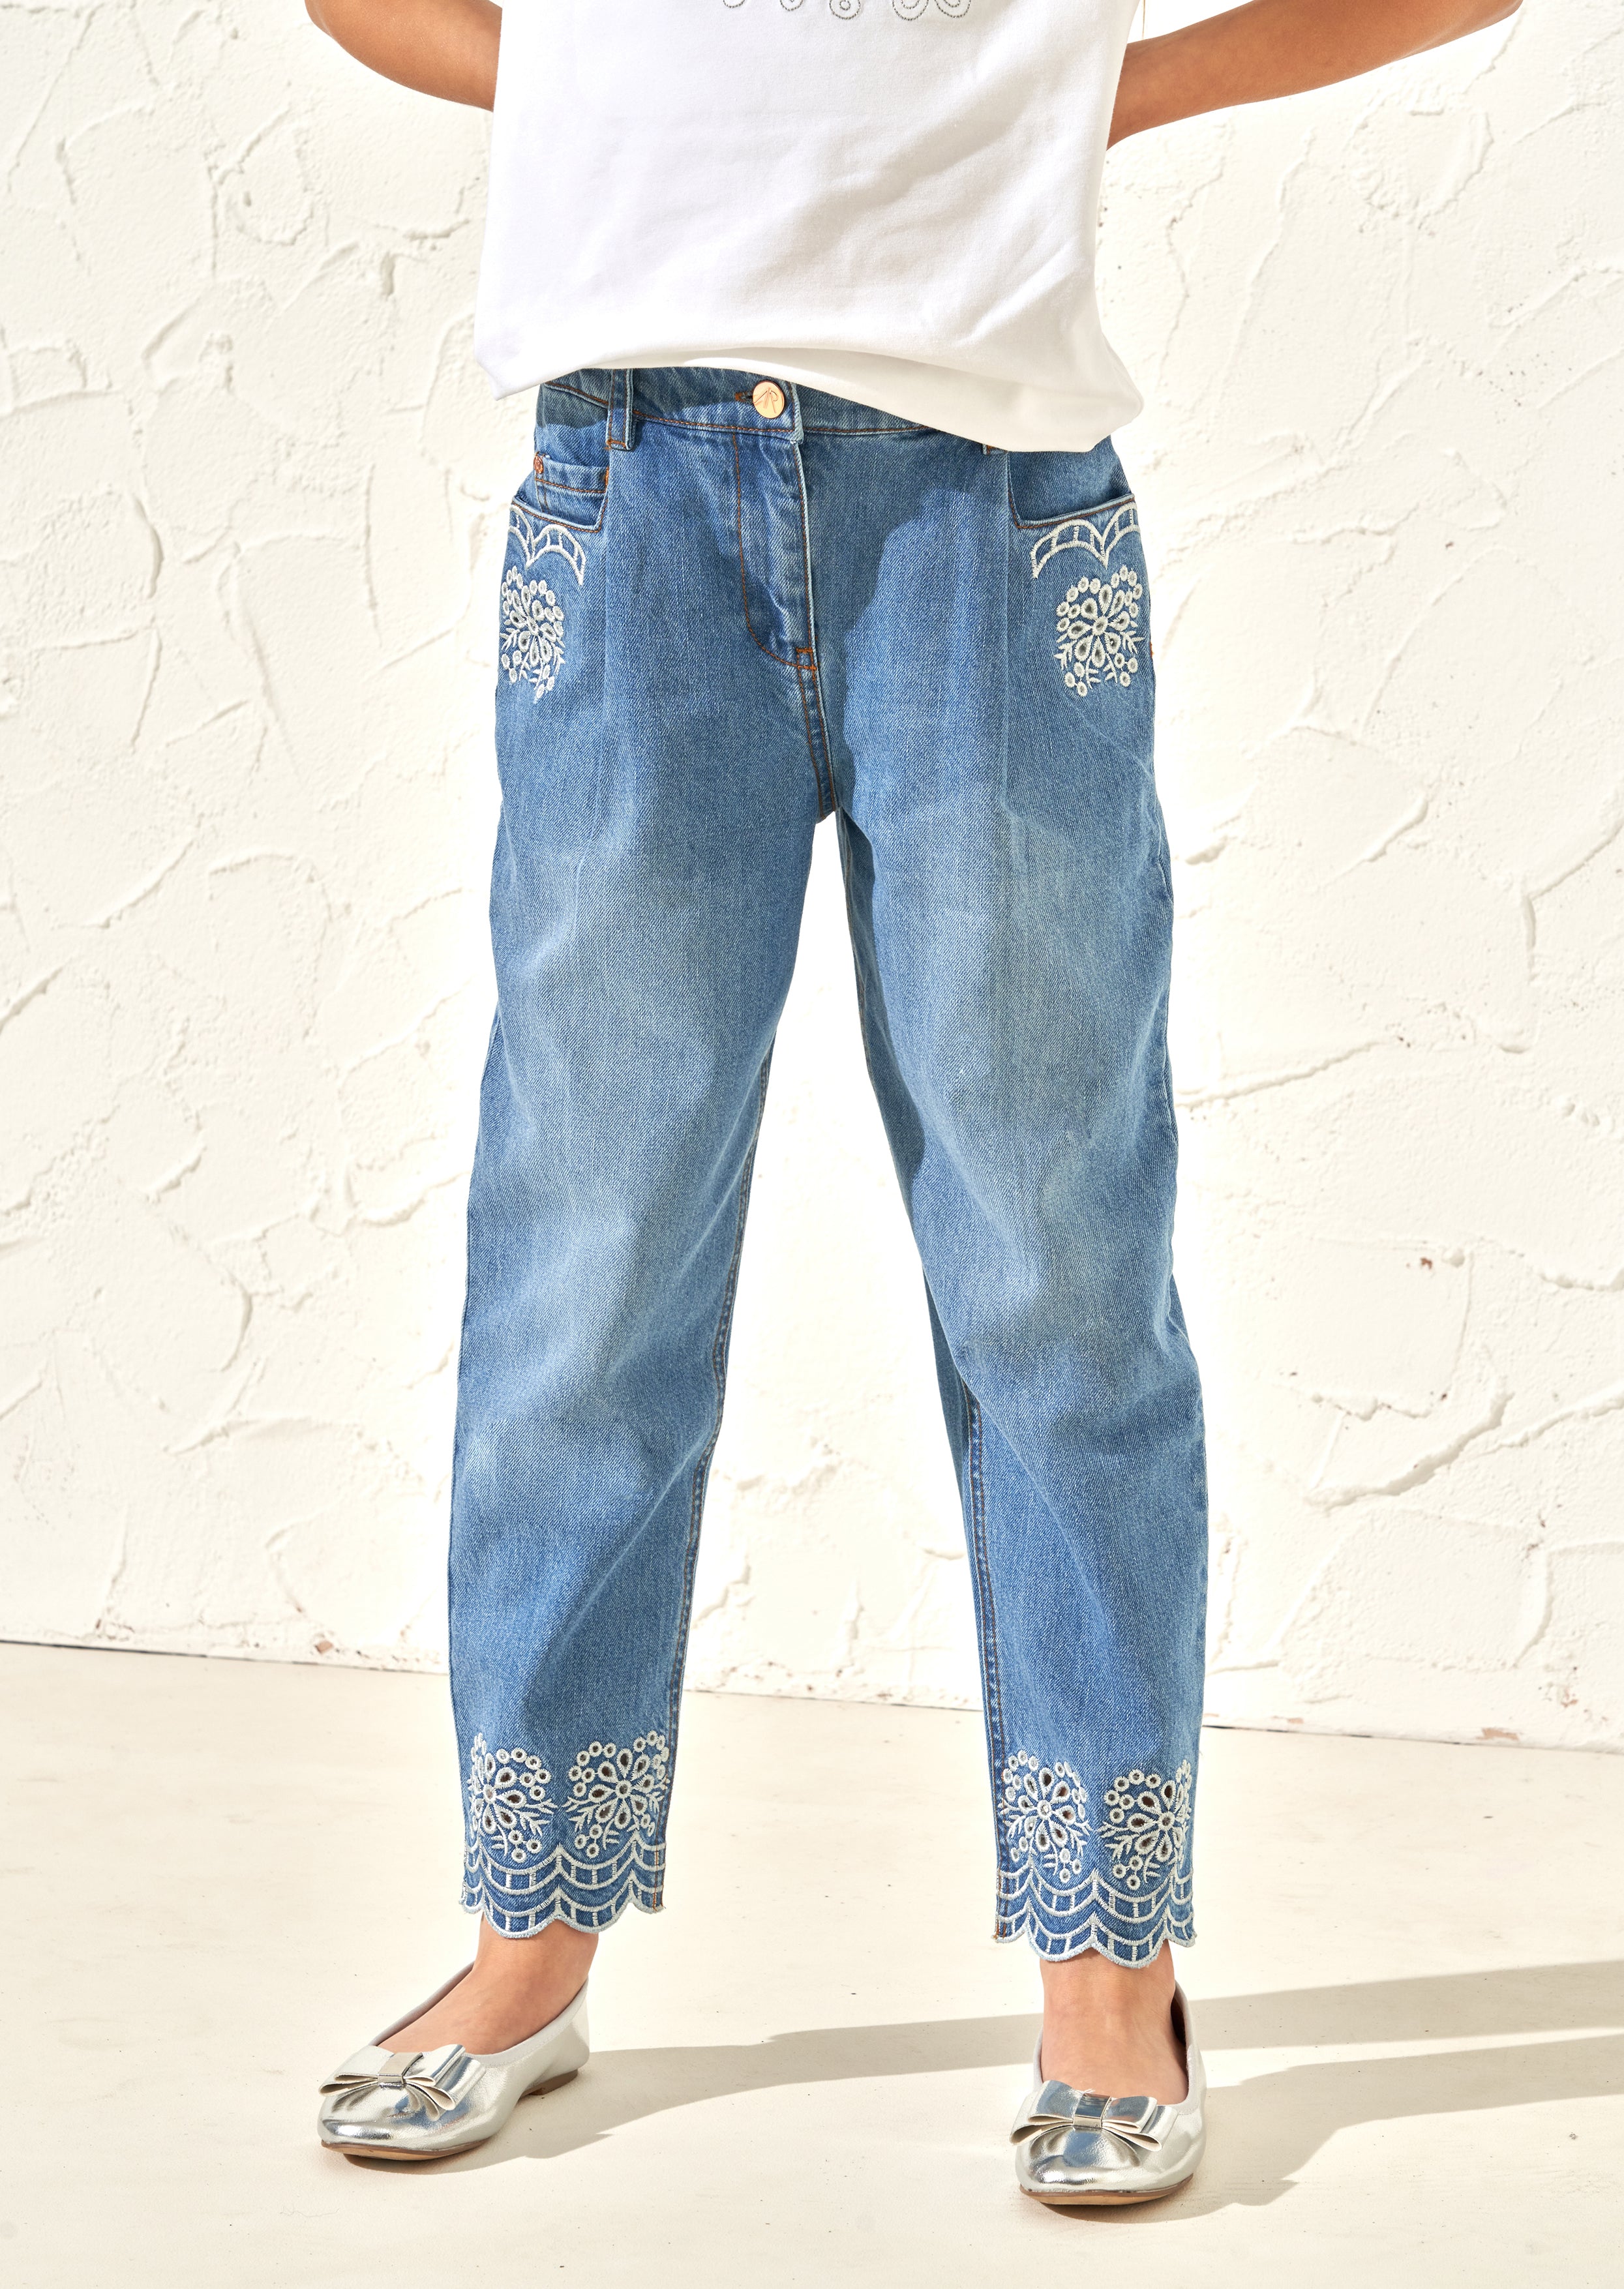 Girls Embroidered Casual Blue Denim Pants